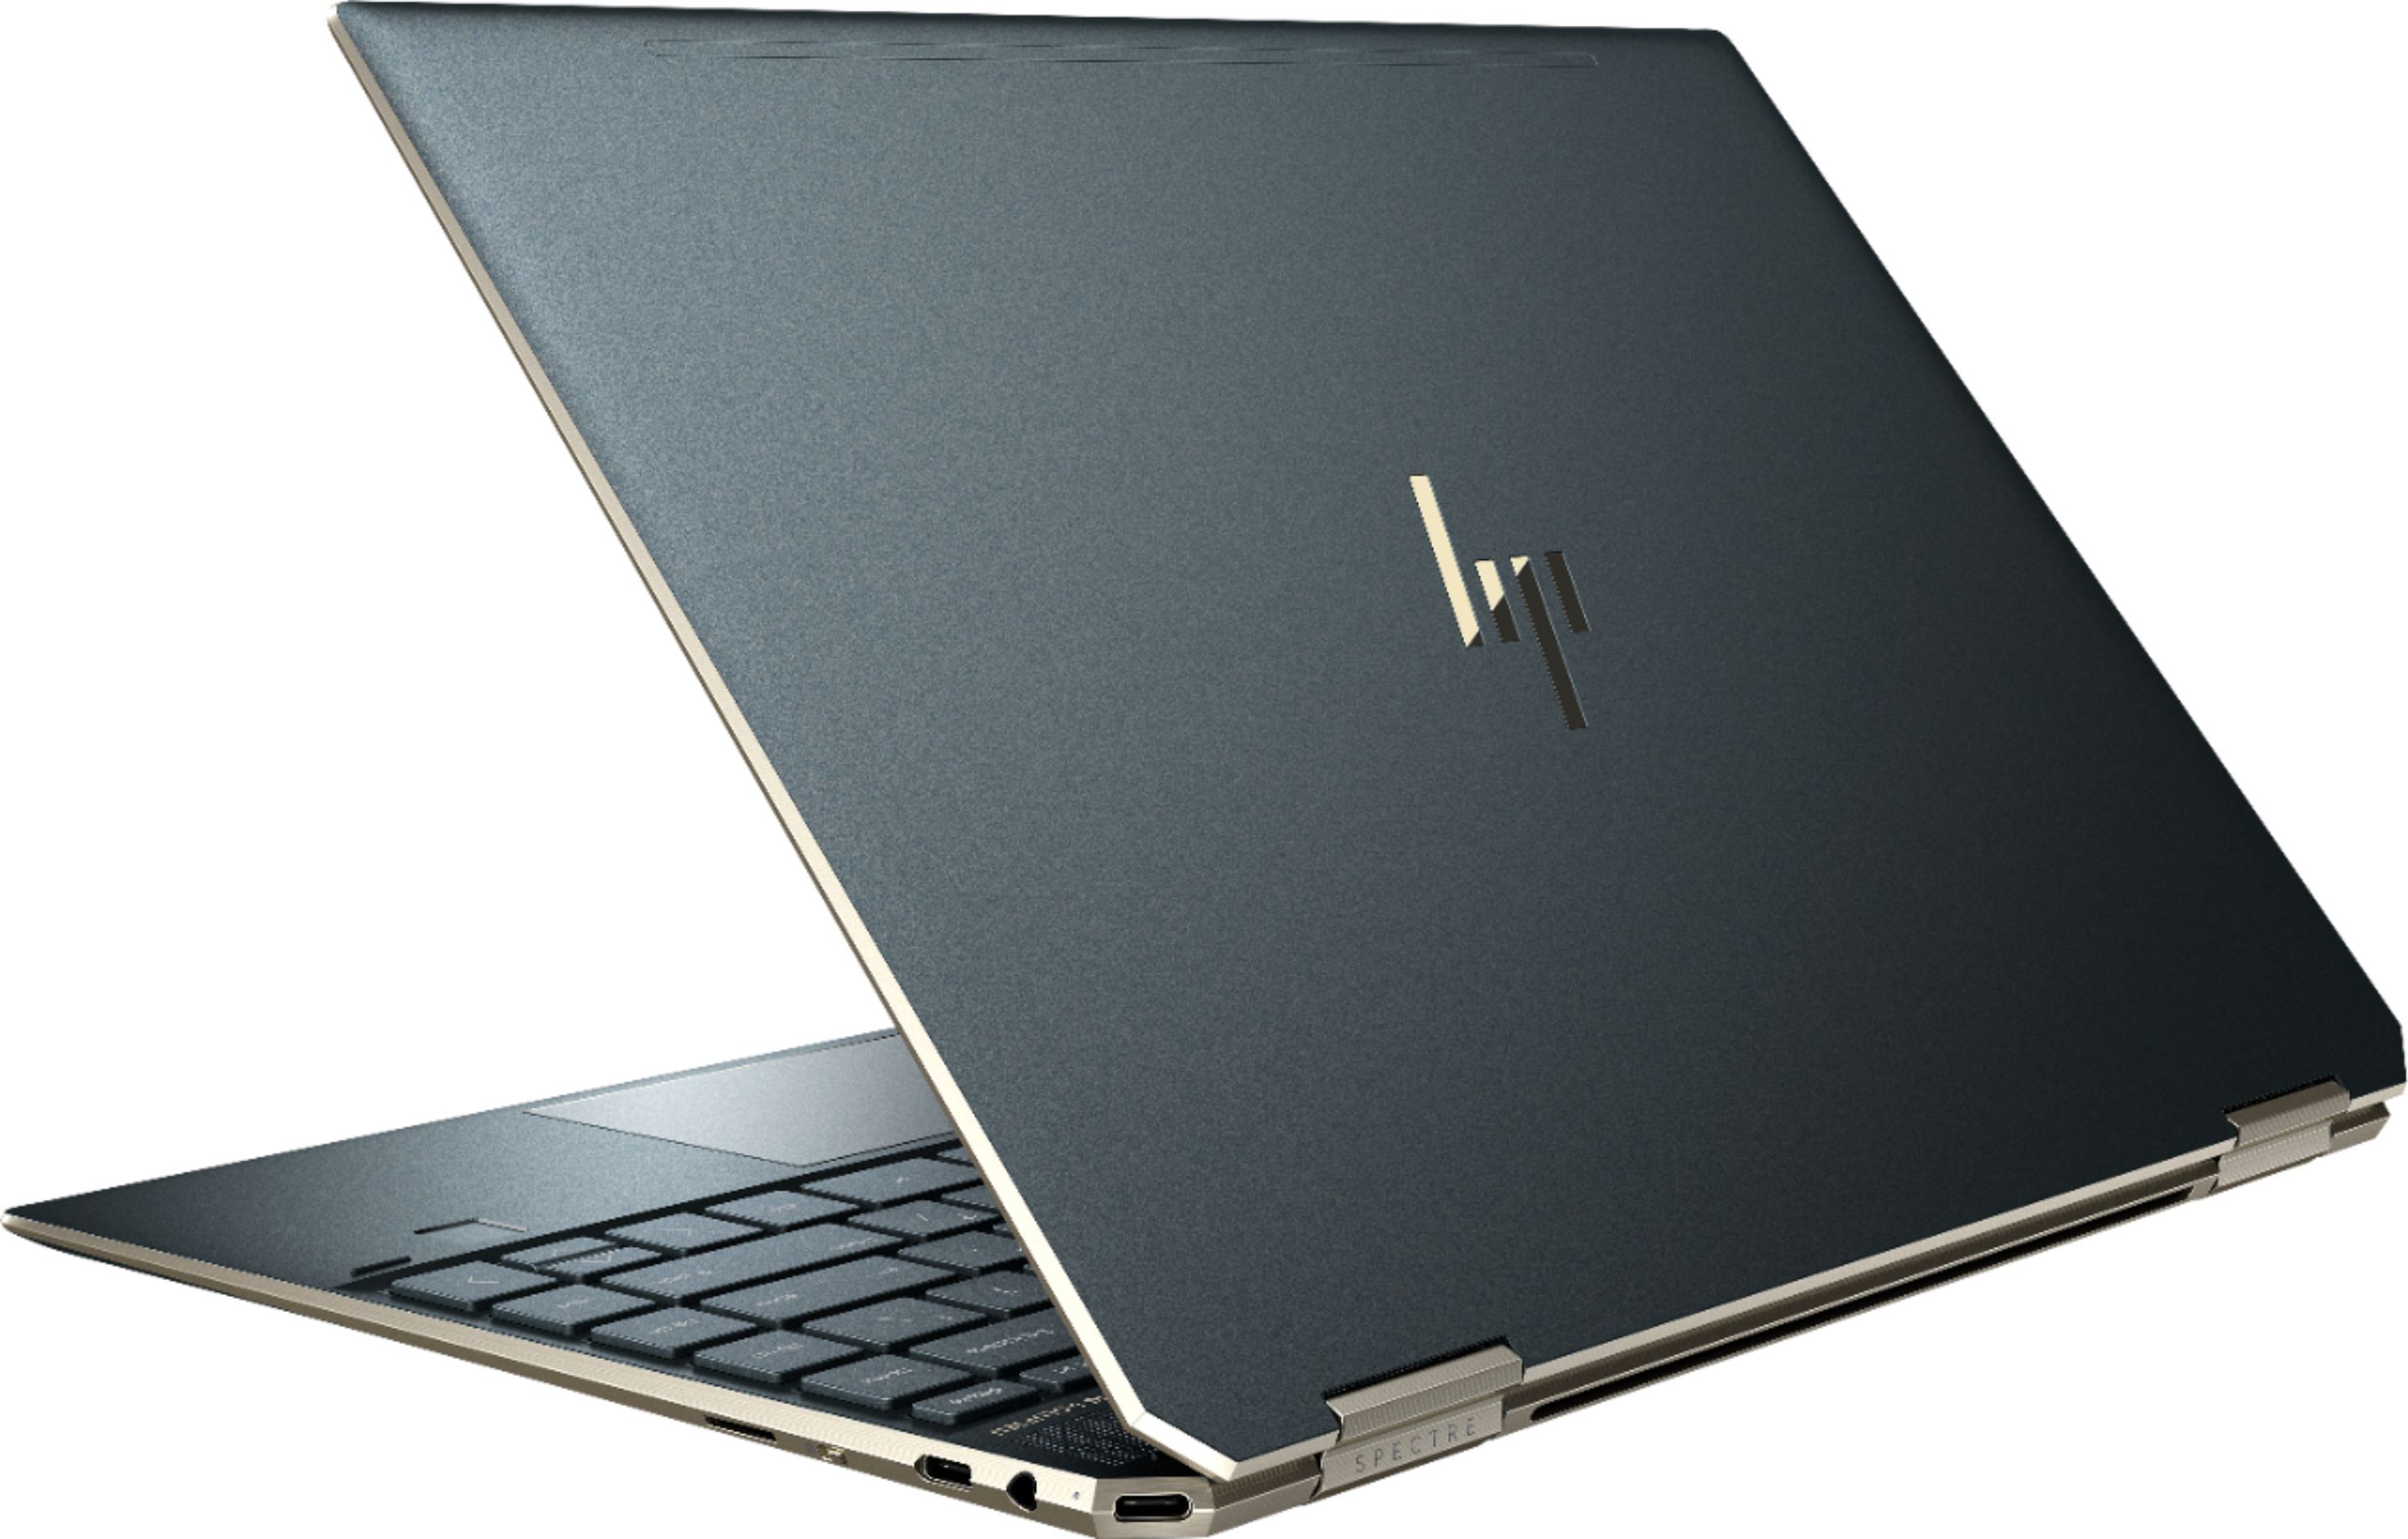 HP Spectre x360 2-in-1 13.3 Laptop Intel Core i7 8GB Memory 512GB SSD +  32GB Optane Natural Silver 13-AW0013DX - Best Buy